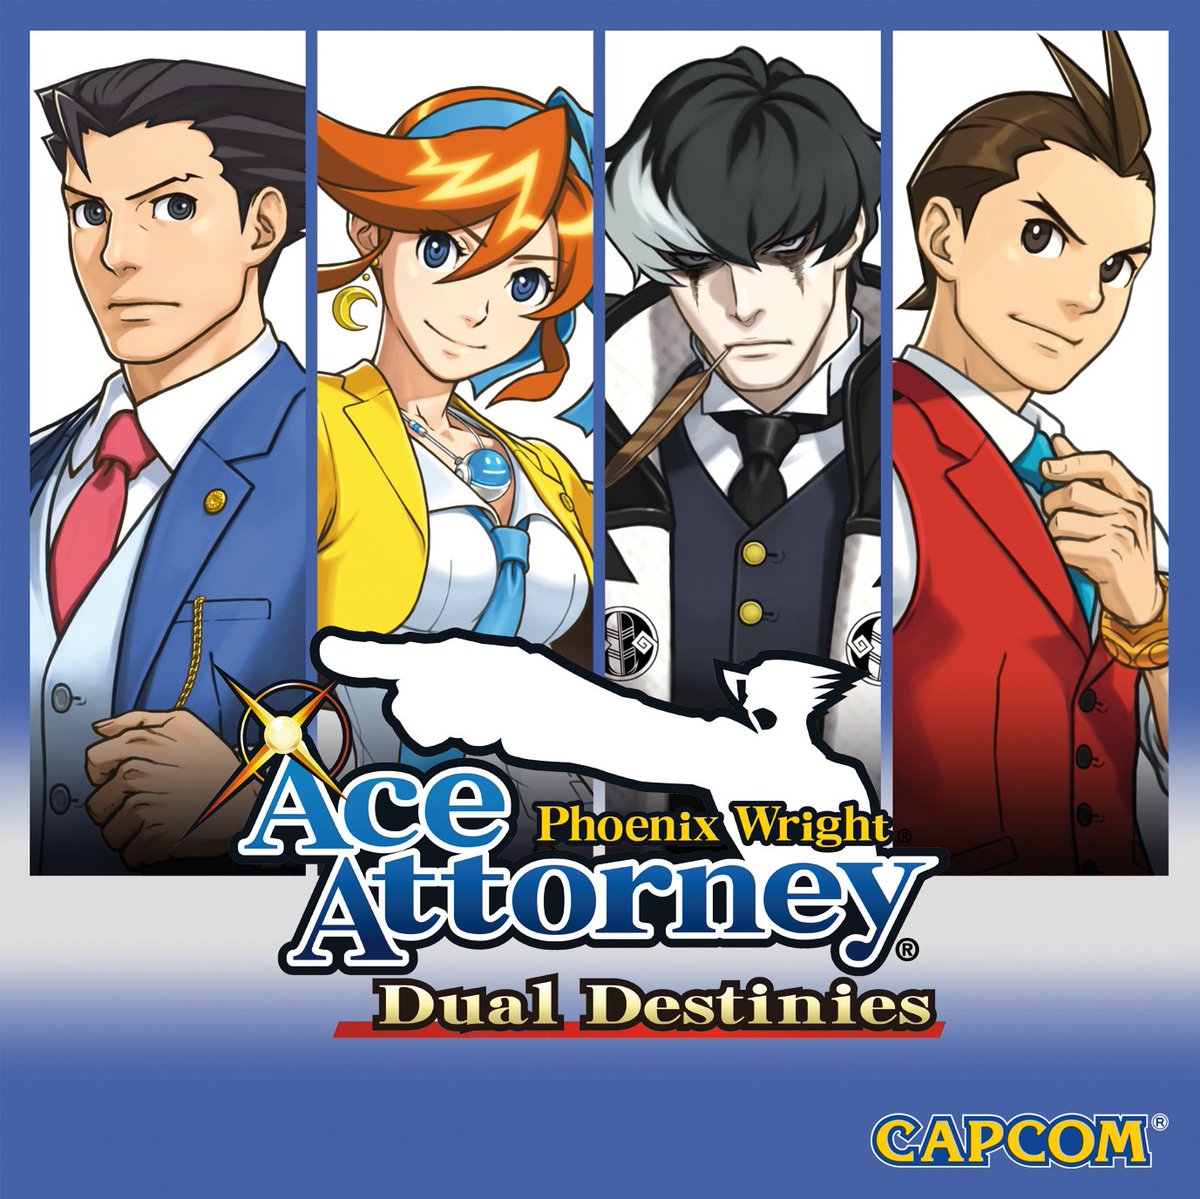 Back to the main series now with Phoenix Wright: Ace Attorney: Dual Destinies. This game puts Phoenix back as the main character (although Apollo still sticks around) and features new lawyer to the series Athena Cykes!